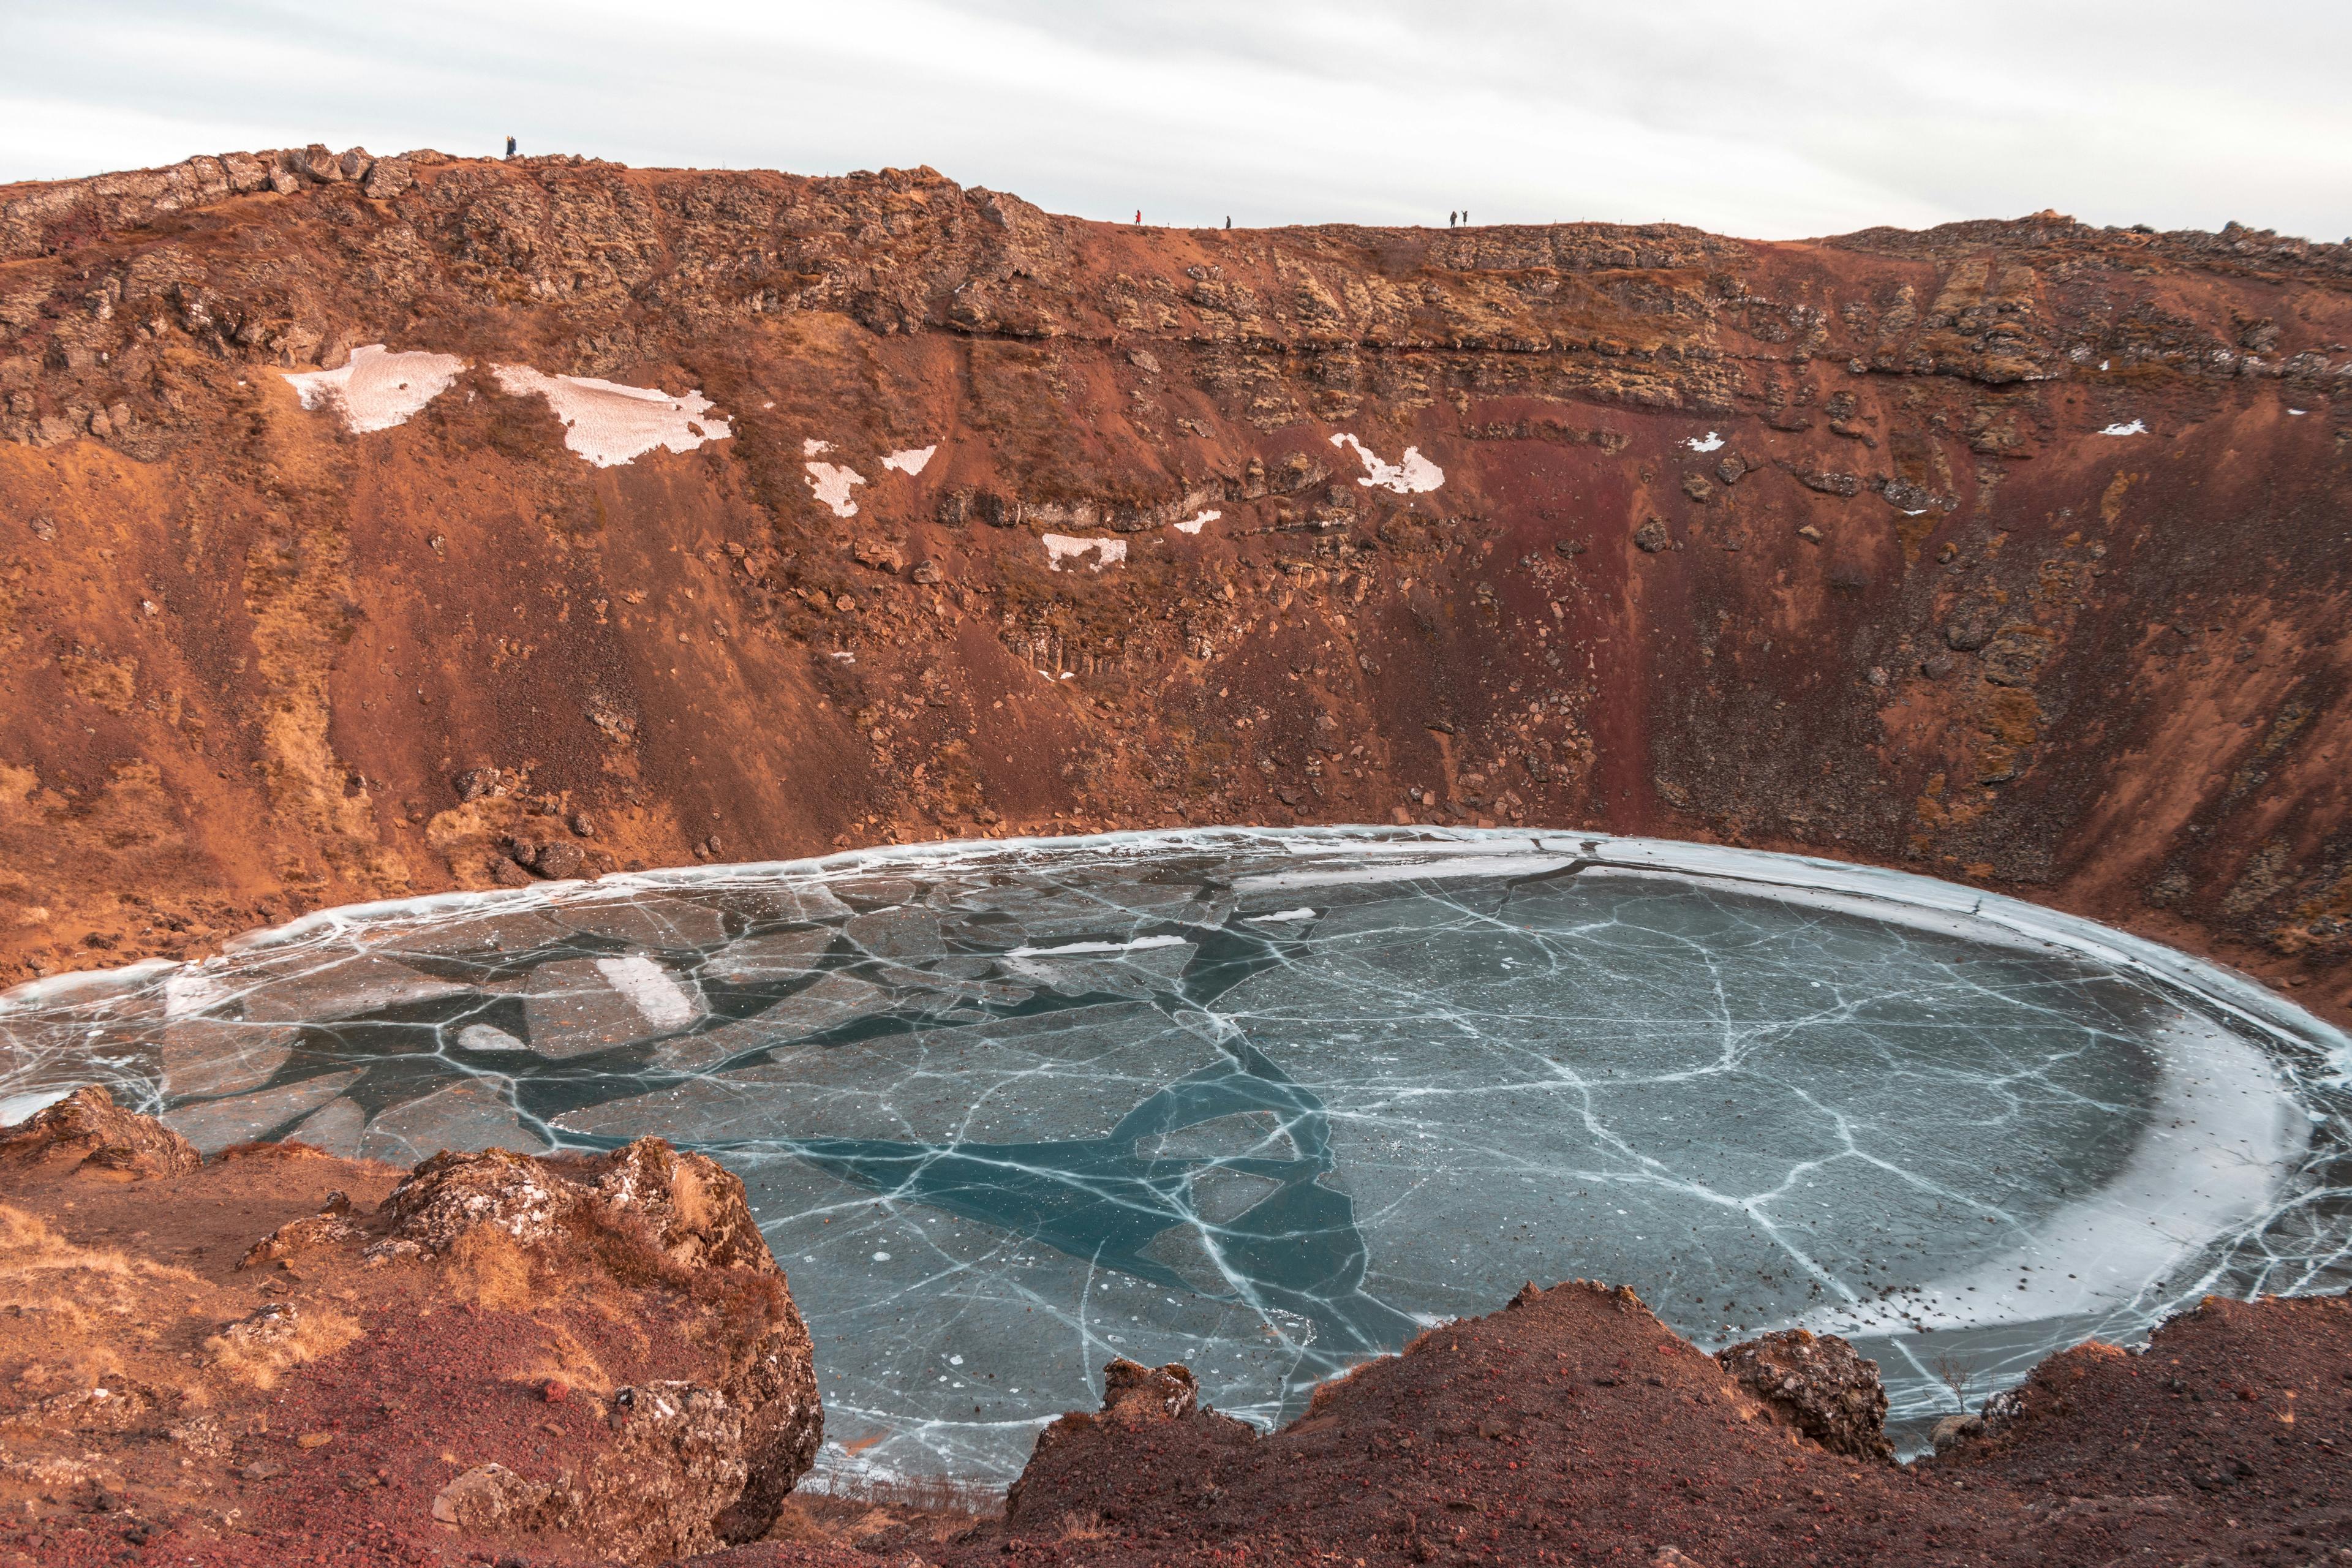 An icy crater lake with a web of cracks on its frozen surface, enclosed by rugged red cliffs, a striking contrast to the sprinkling of snow, under a soft, glowing sky.